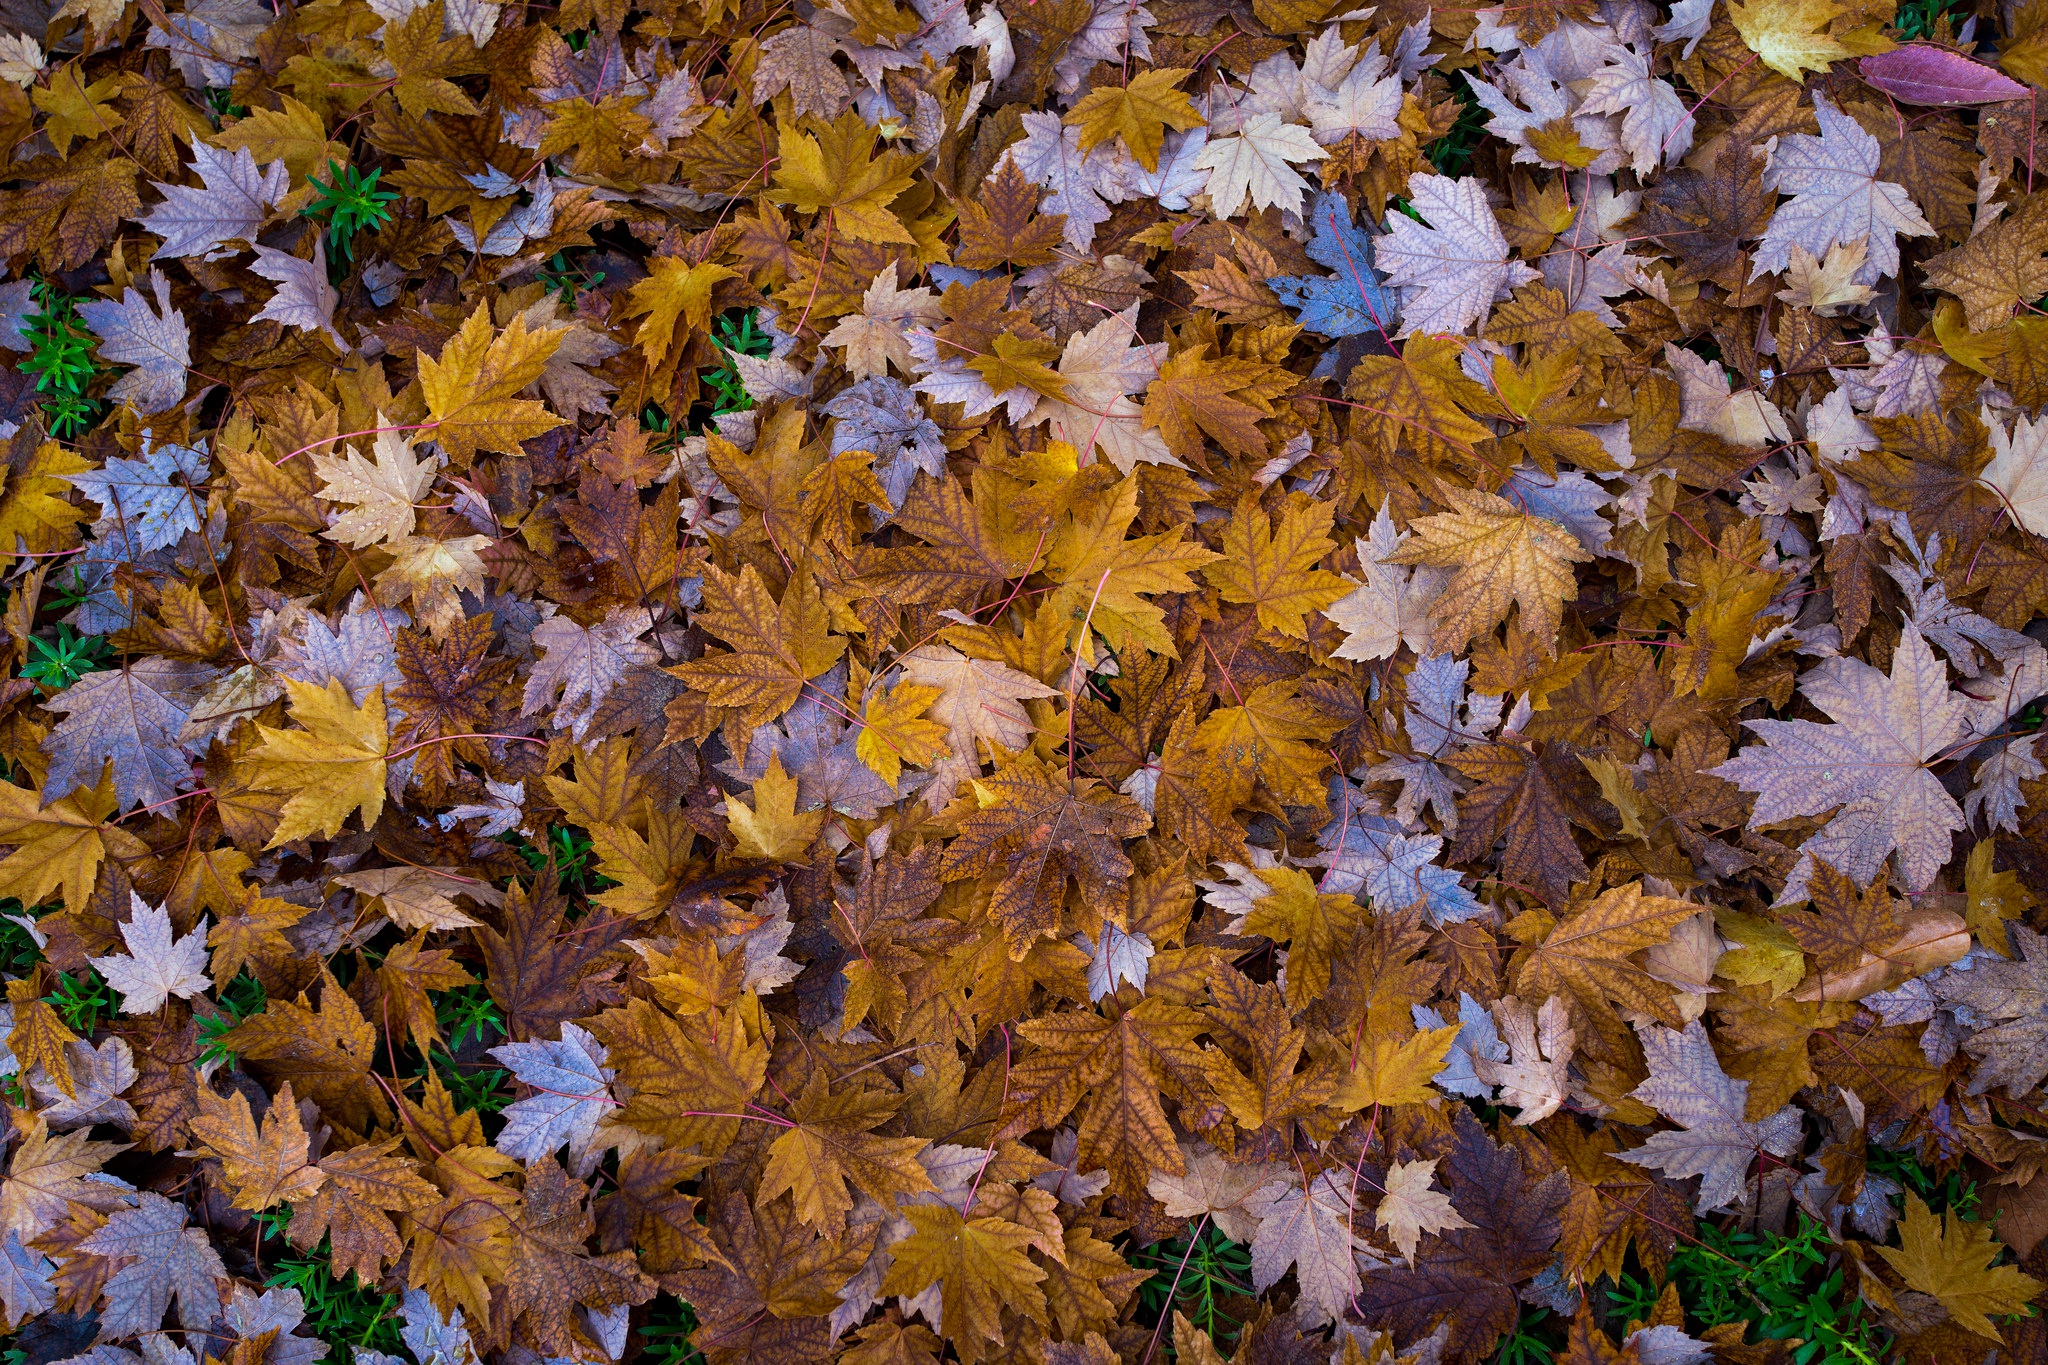 General 2048x1365 fall leaves nature outdoors